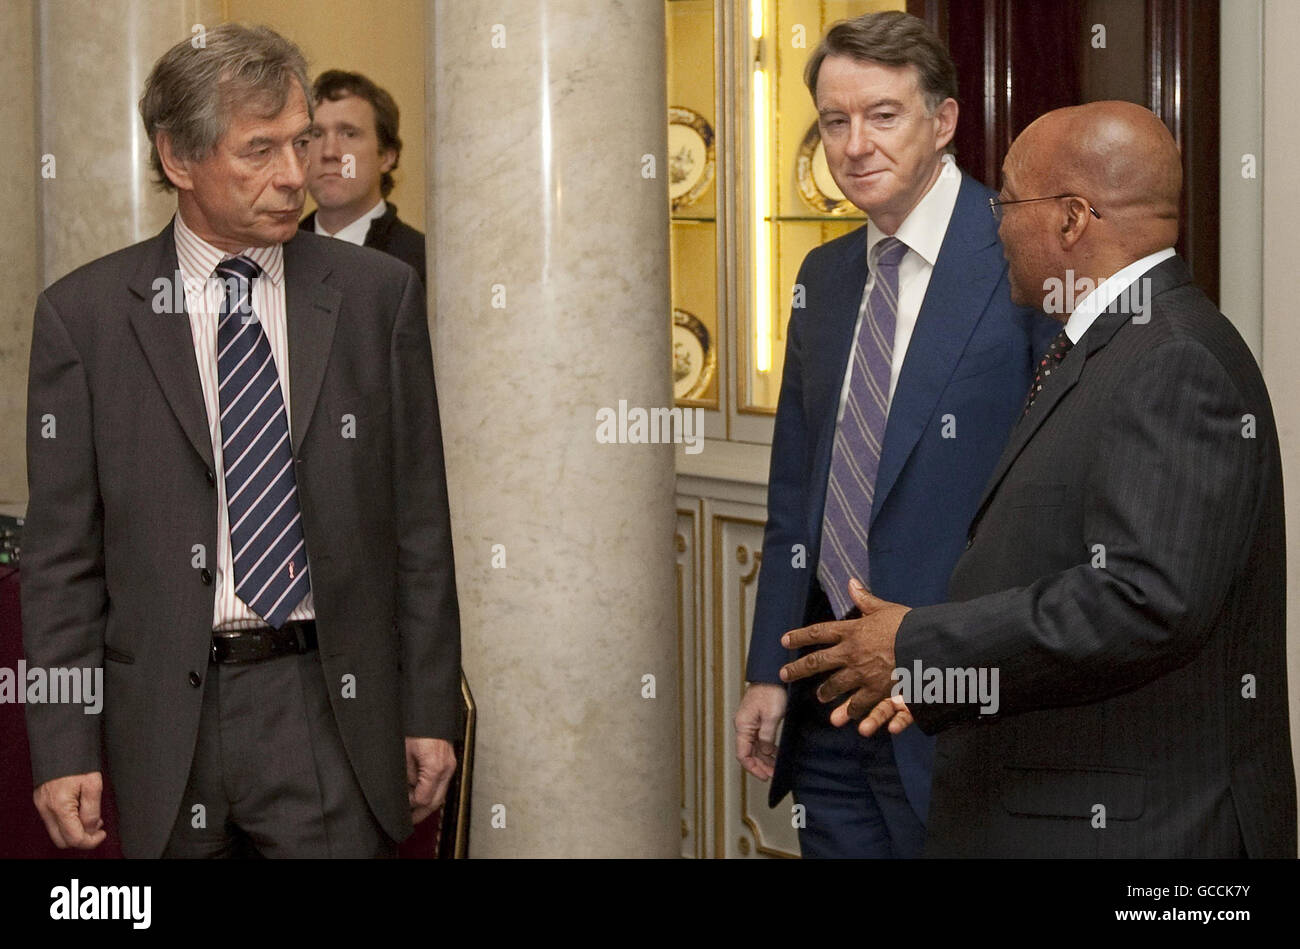 South African President Jacob Zuma talks with Confederation of British Industry (CBI) Deputy President Martin Broughton (left) and Business Secretary Lord Mandelson during a business breakfast at Buckingham Palace, central London on the last day of his State Visit to Britain. Stock Photo